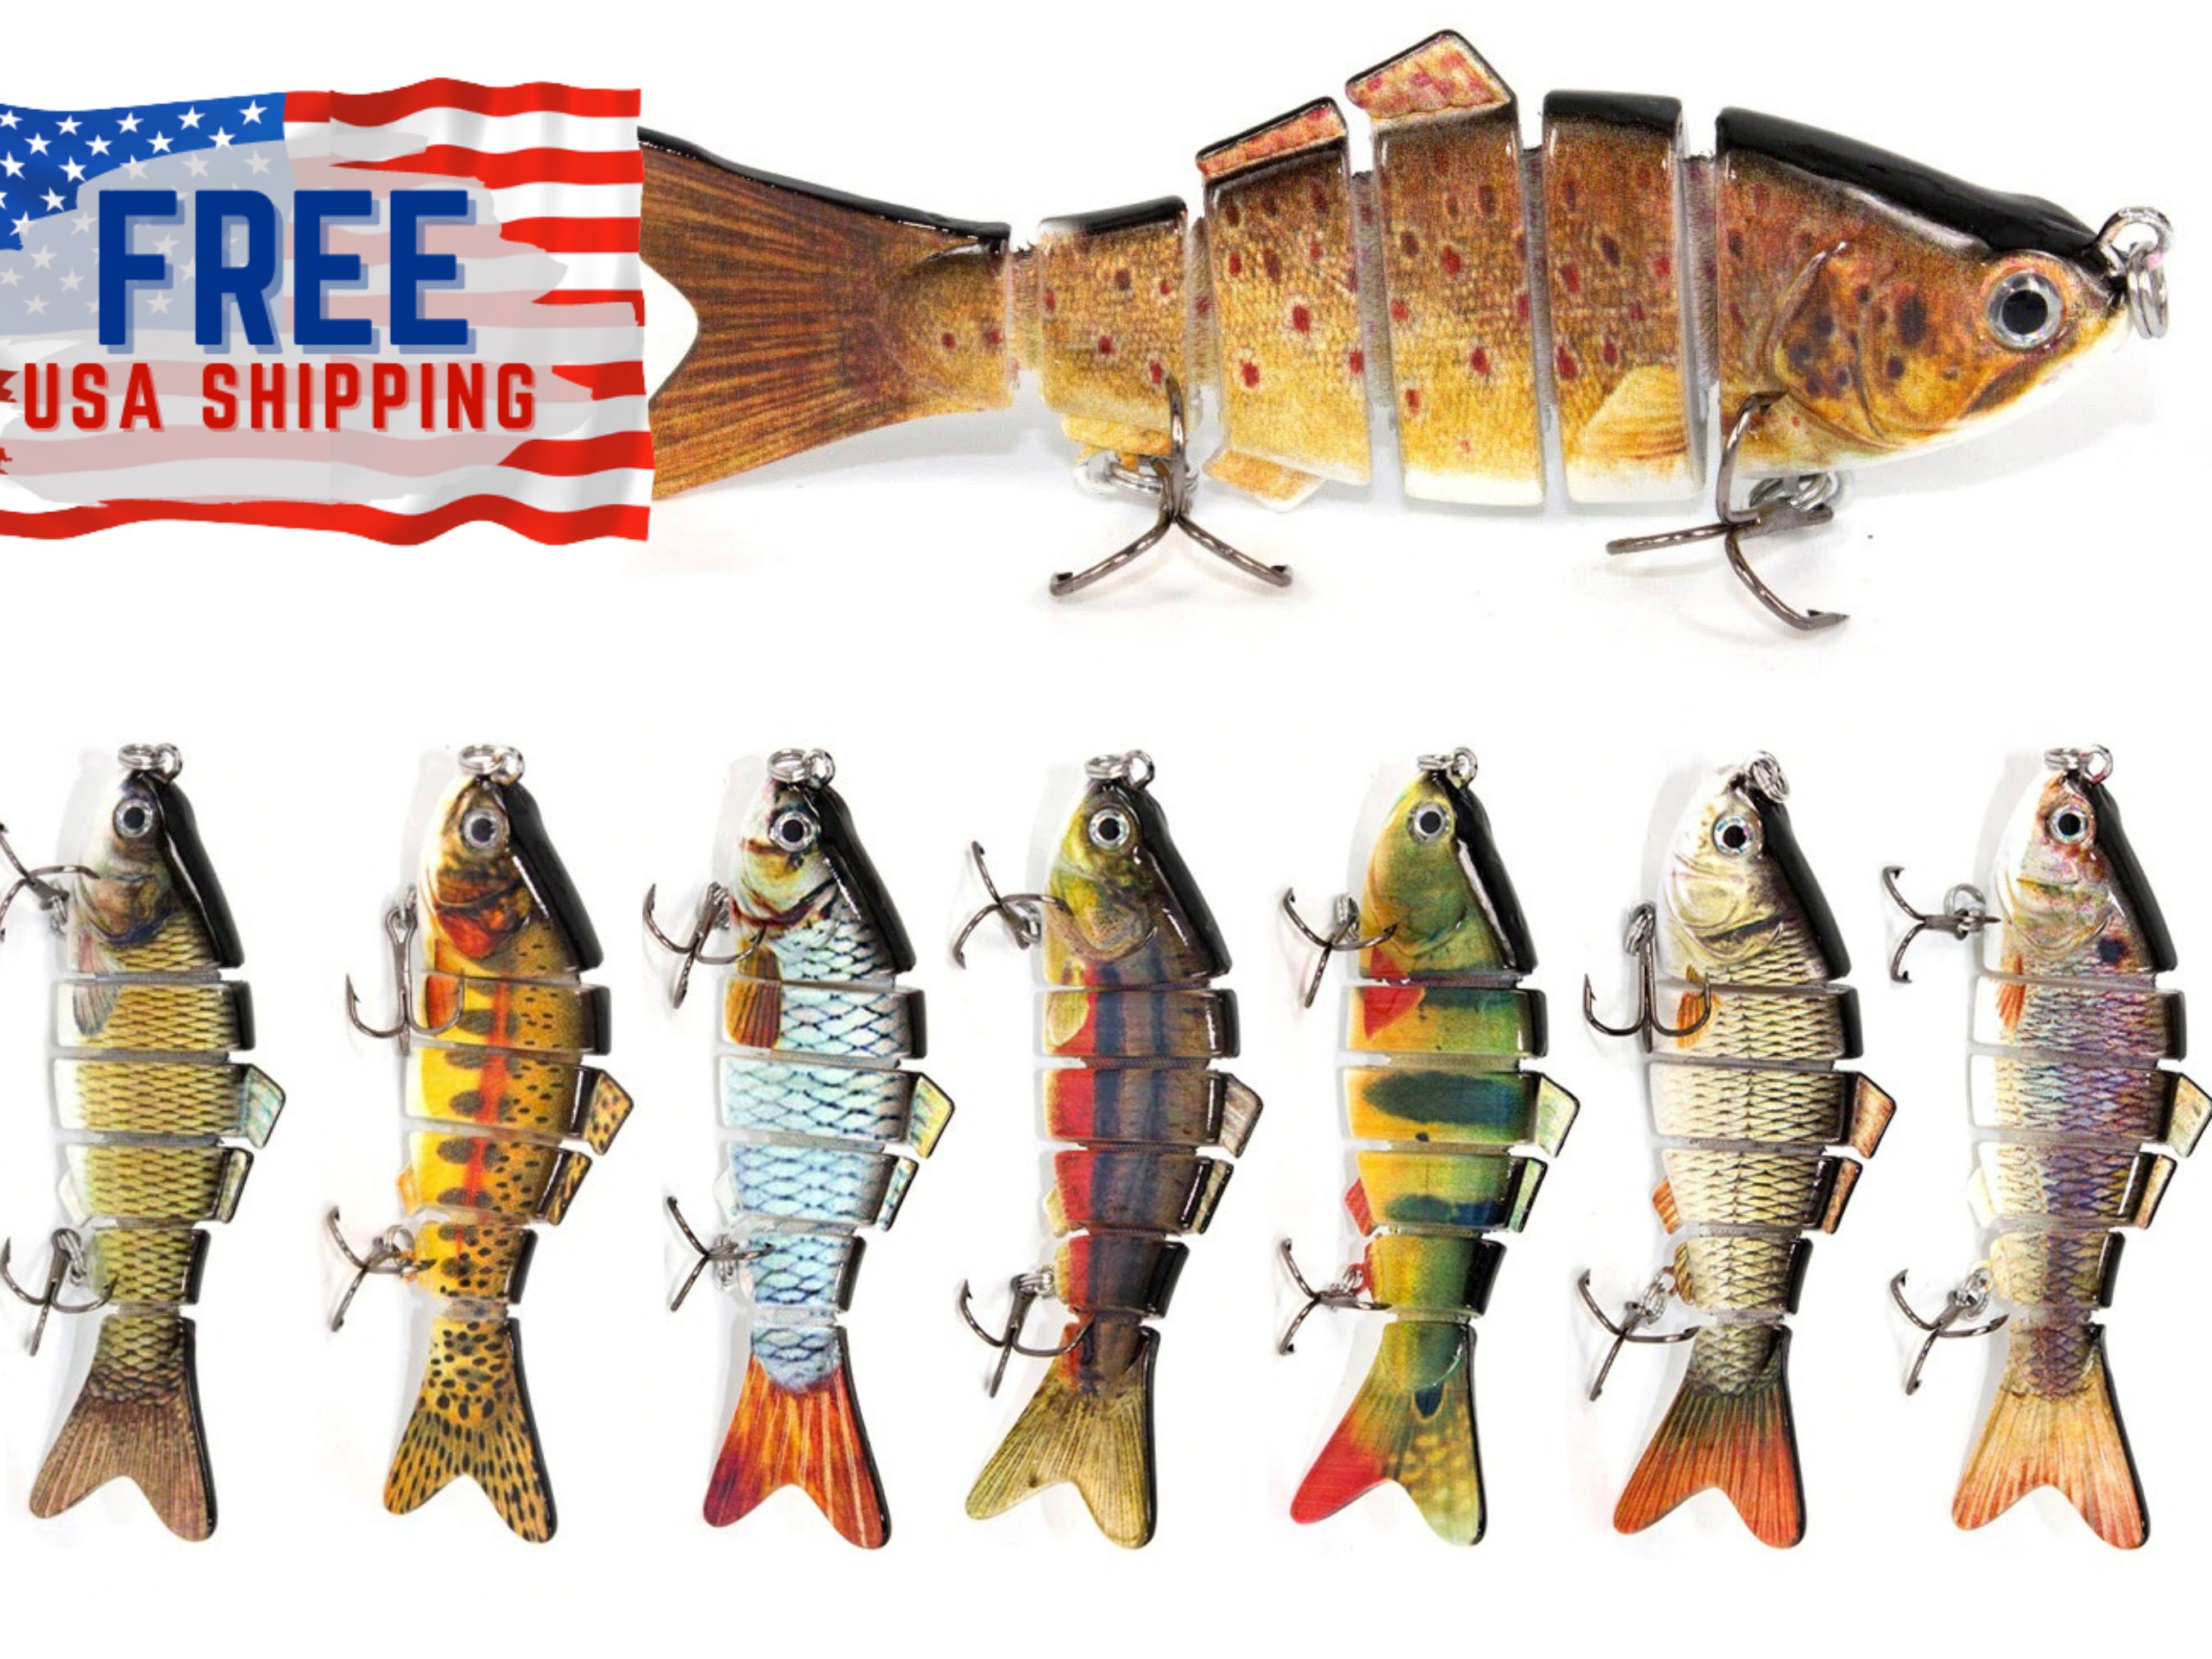 Swimbait Lure Jointed Trout Pike Fishing Lures Crankbait Wobblers